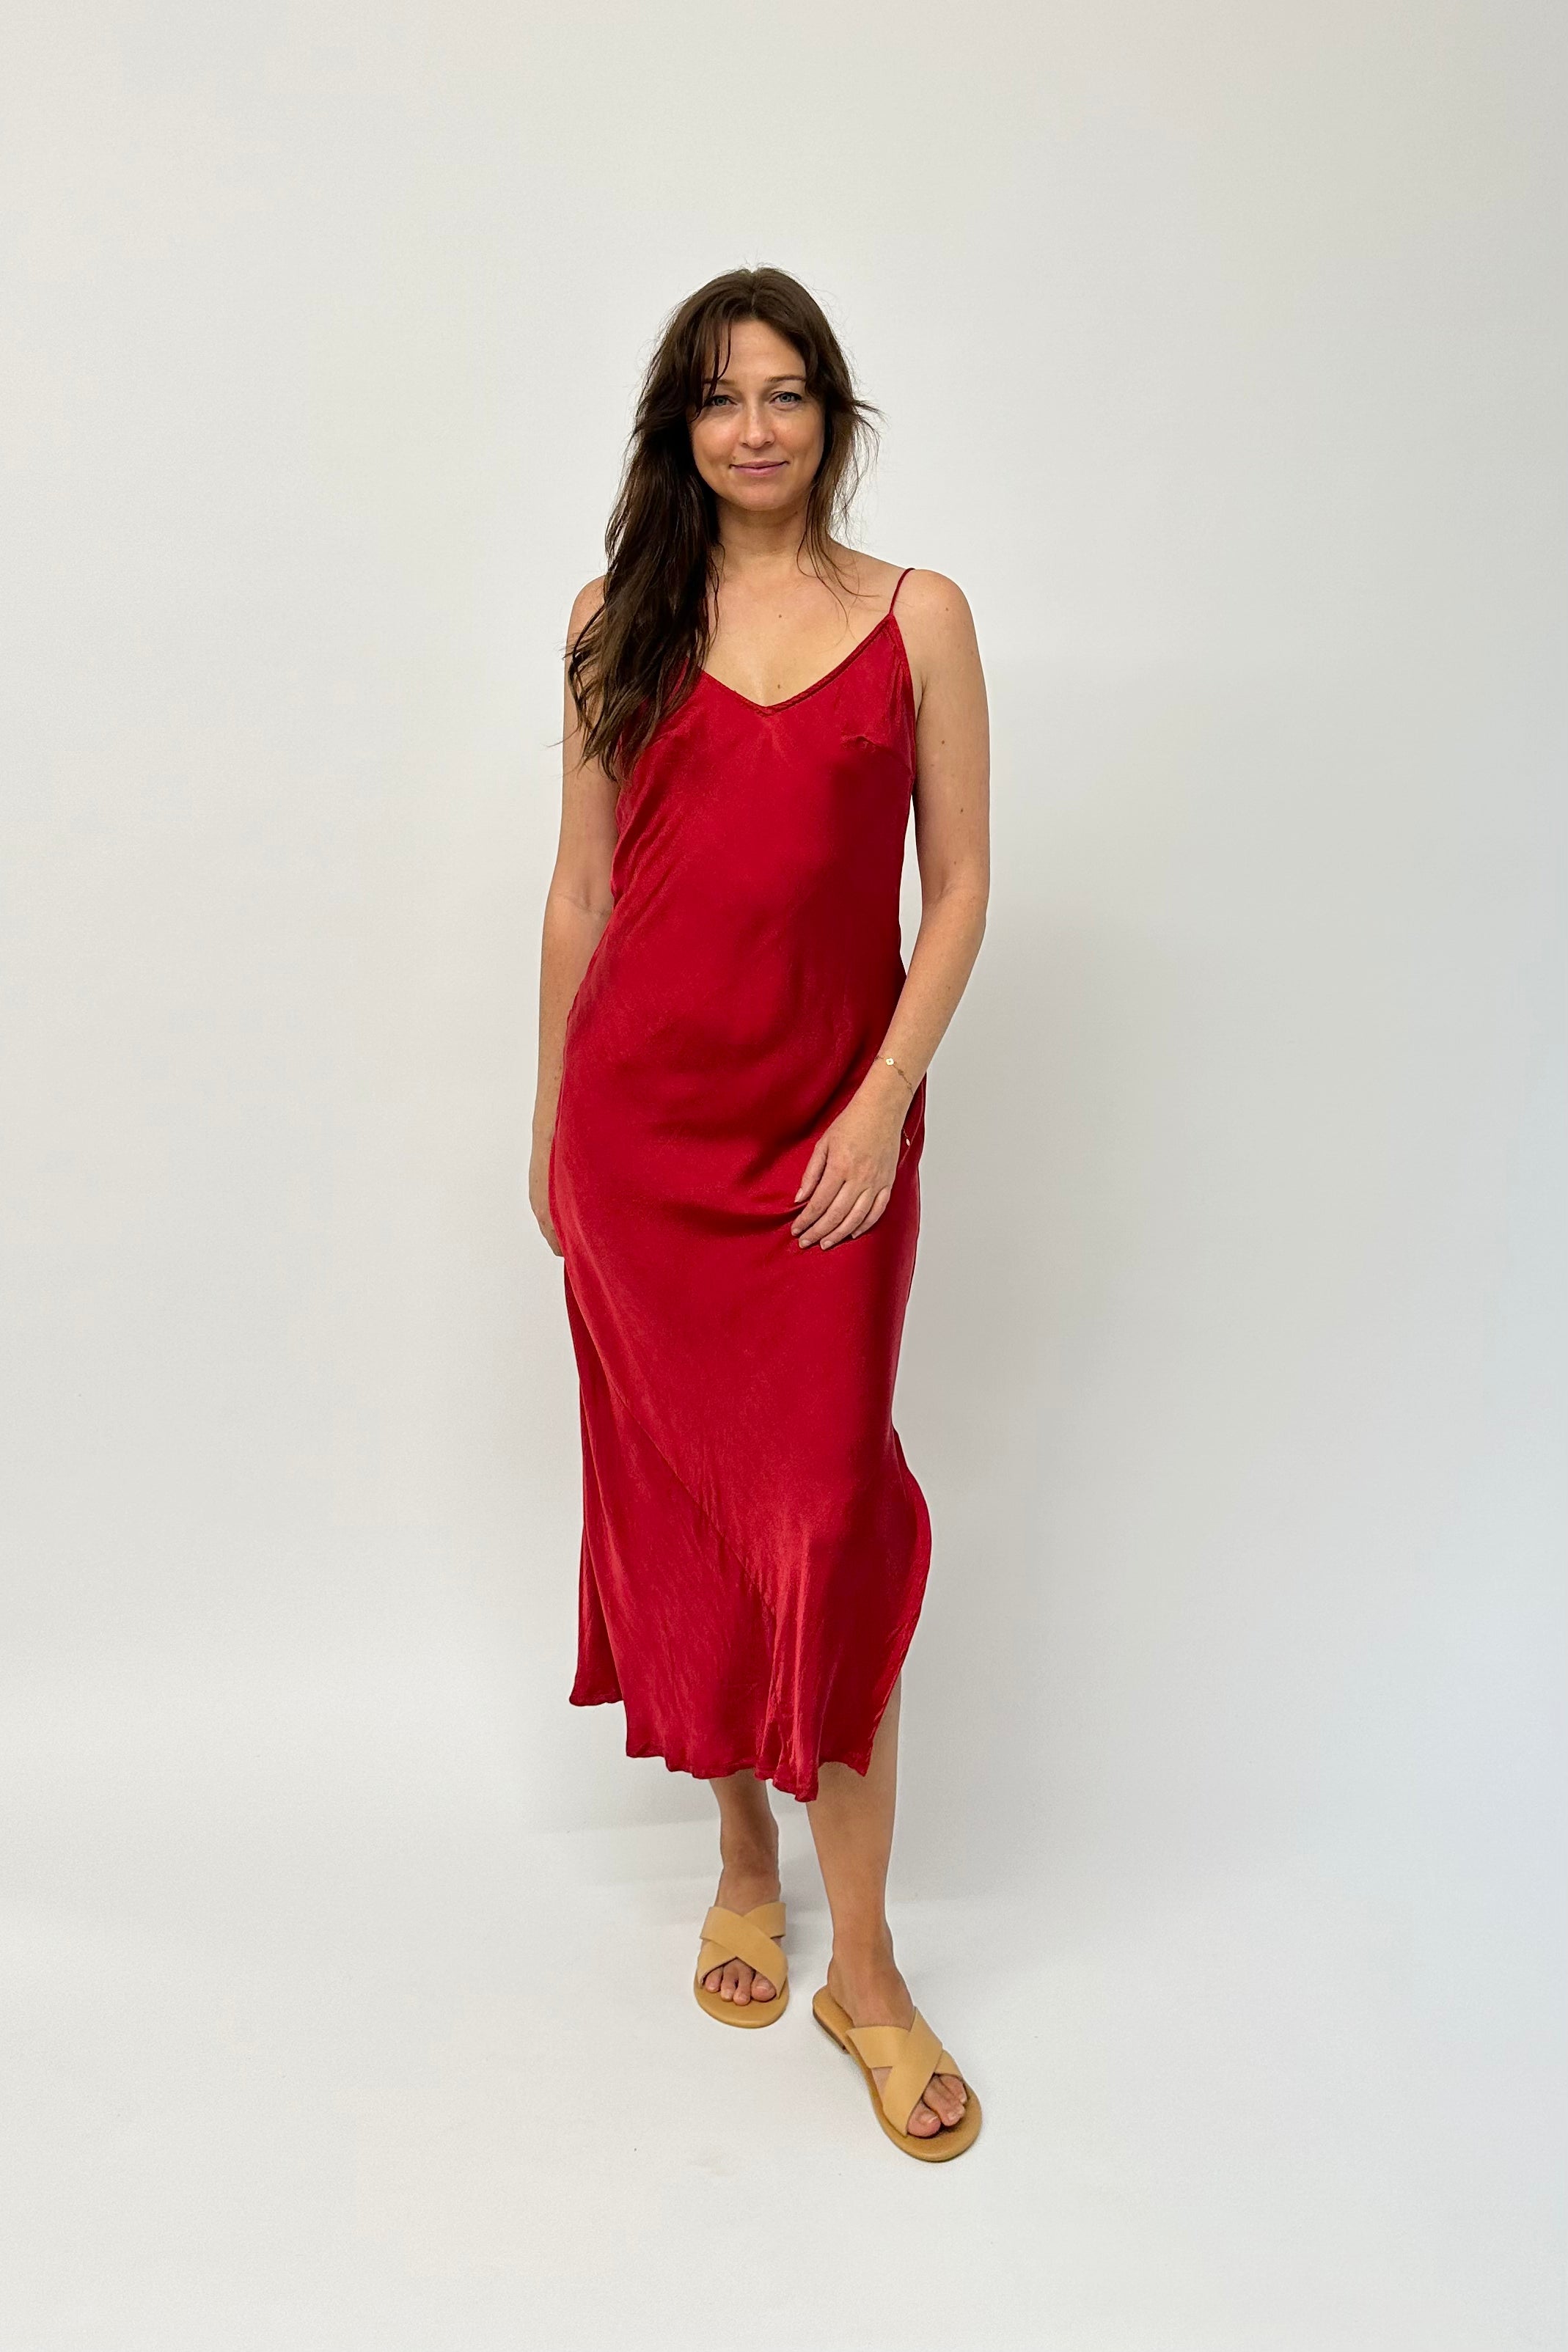 Marilyn Classic Dress - Red